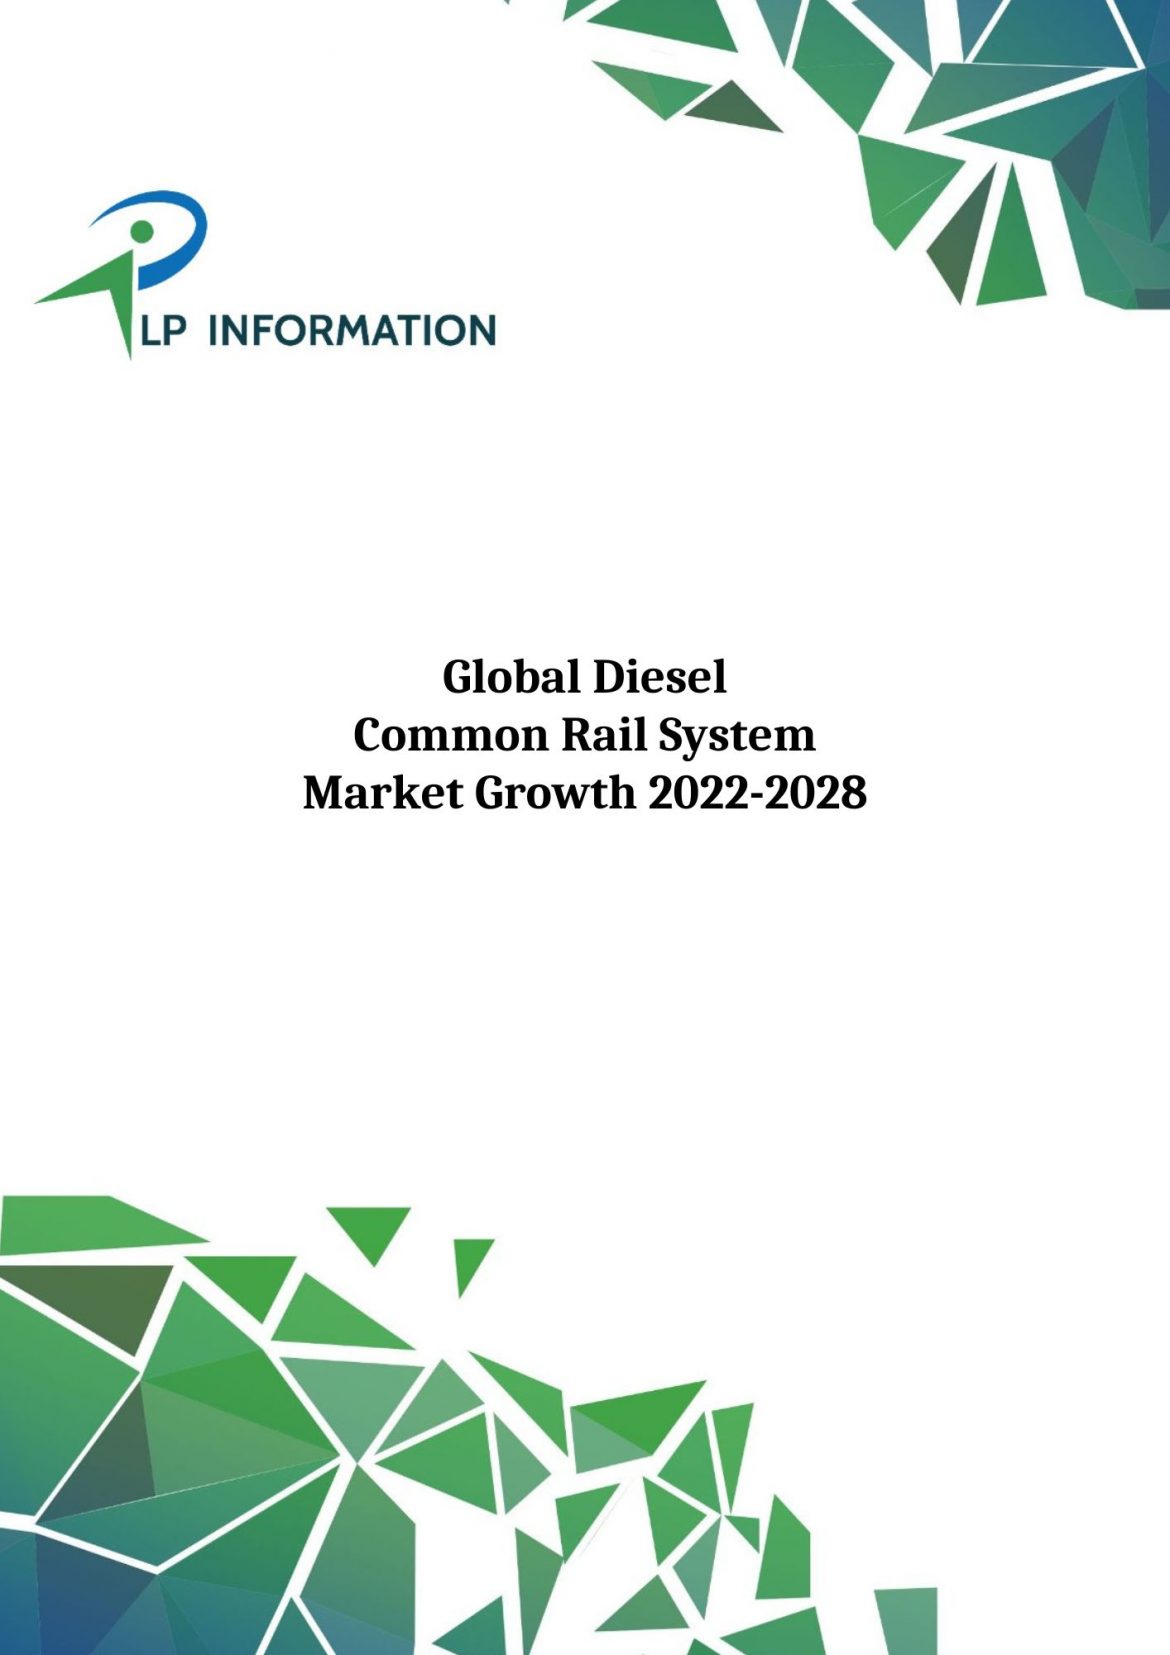 Global Diesel Common Rail System Market Growth 2022-2028